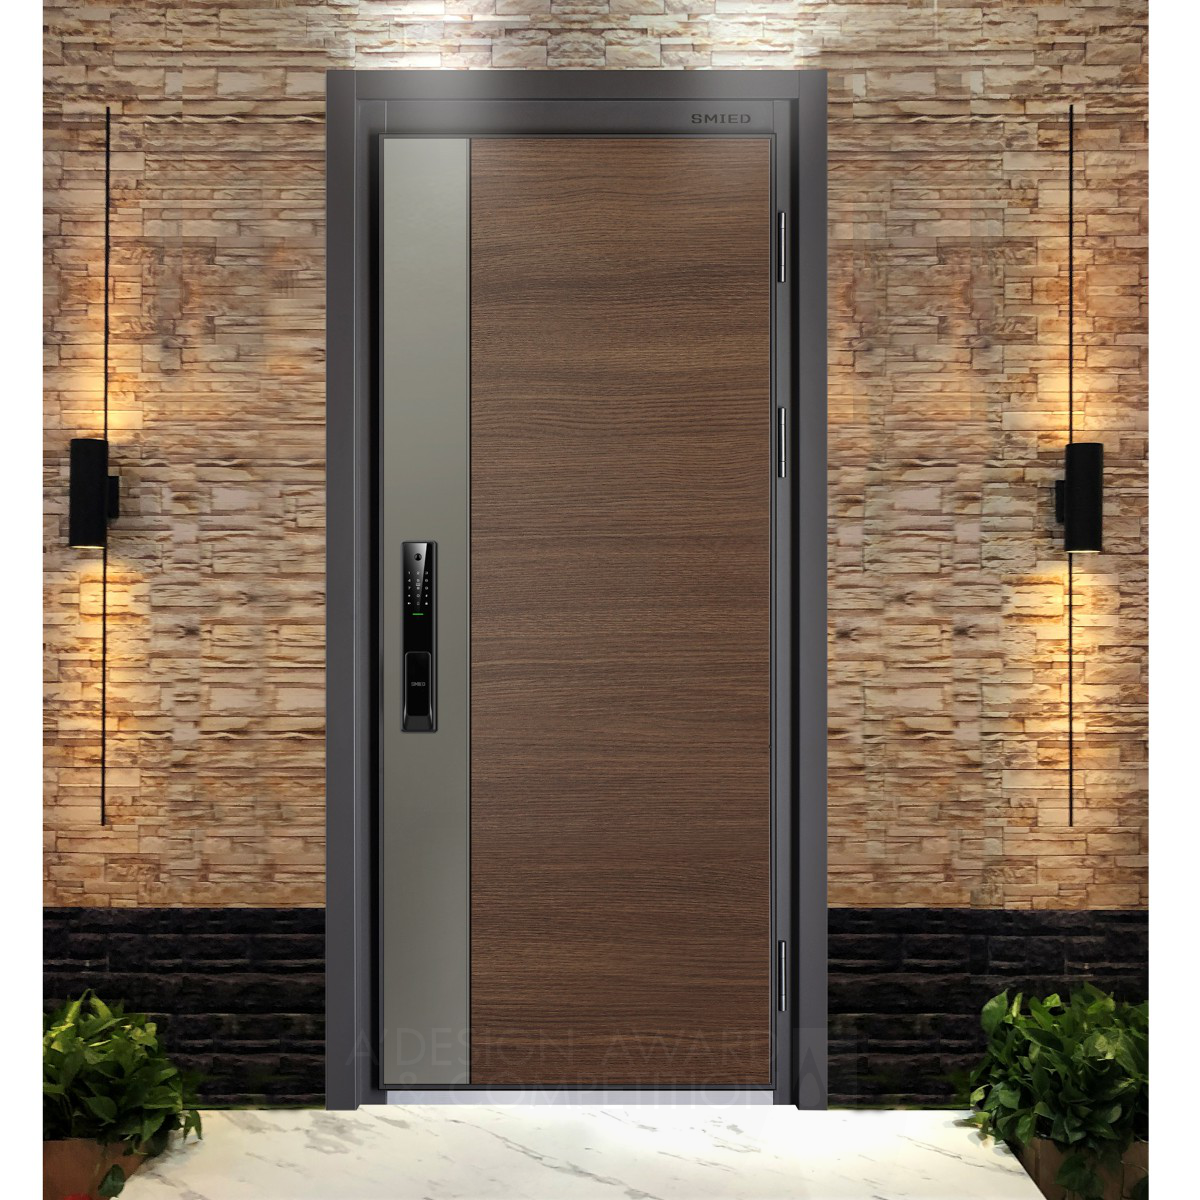 Smied Mate03: Redefining Home Aesthetics with Customizable, Intelligent, and Fashionable Door Design